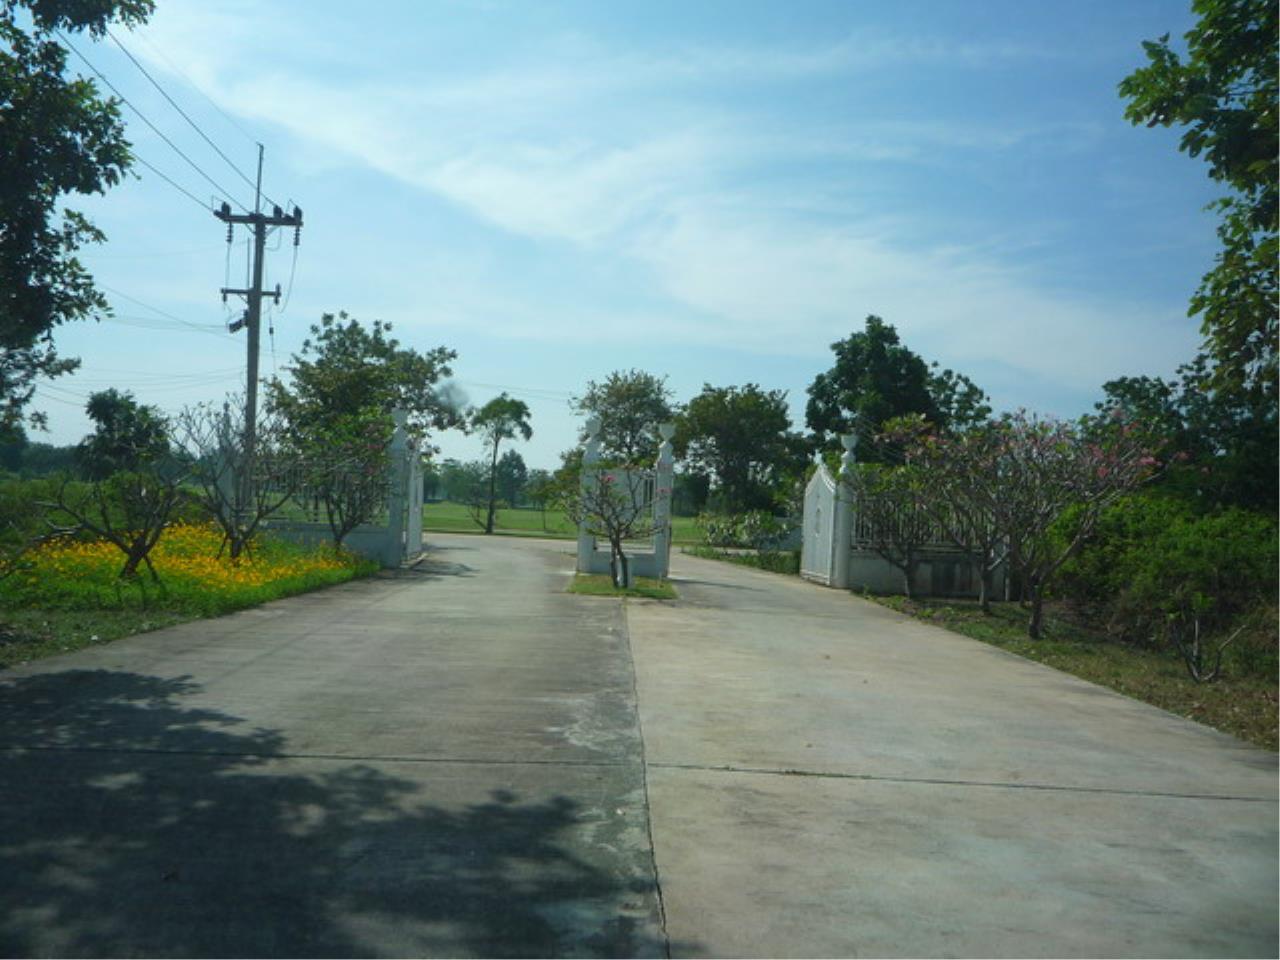 Forbest Properties Agency's 29565 - Banharn-Jamsai Road, Nakhon Pathom, Golf course for sale, area 513 acres 5